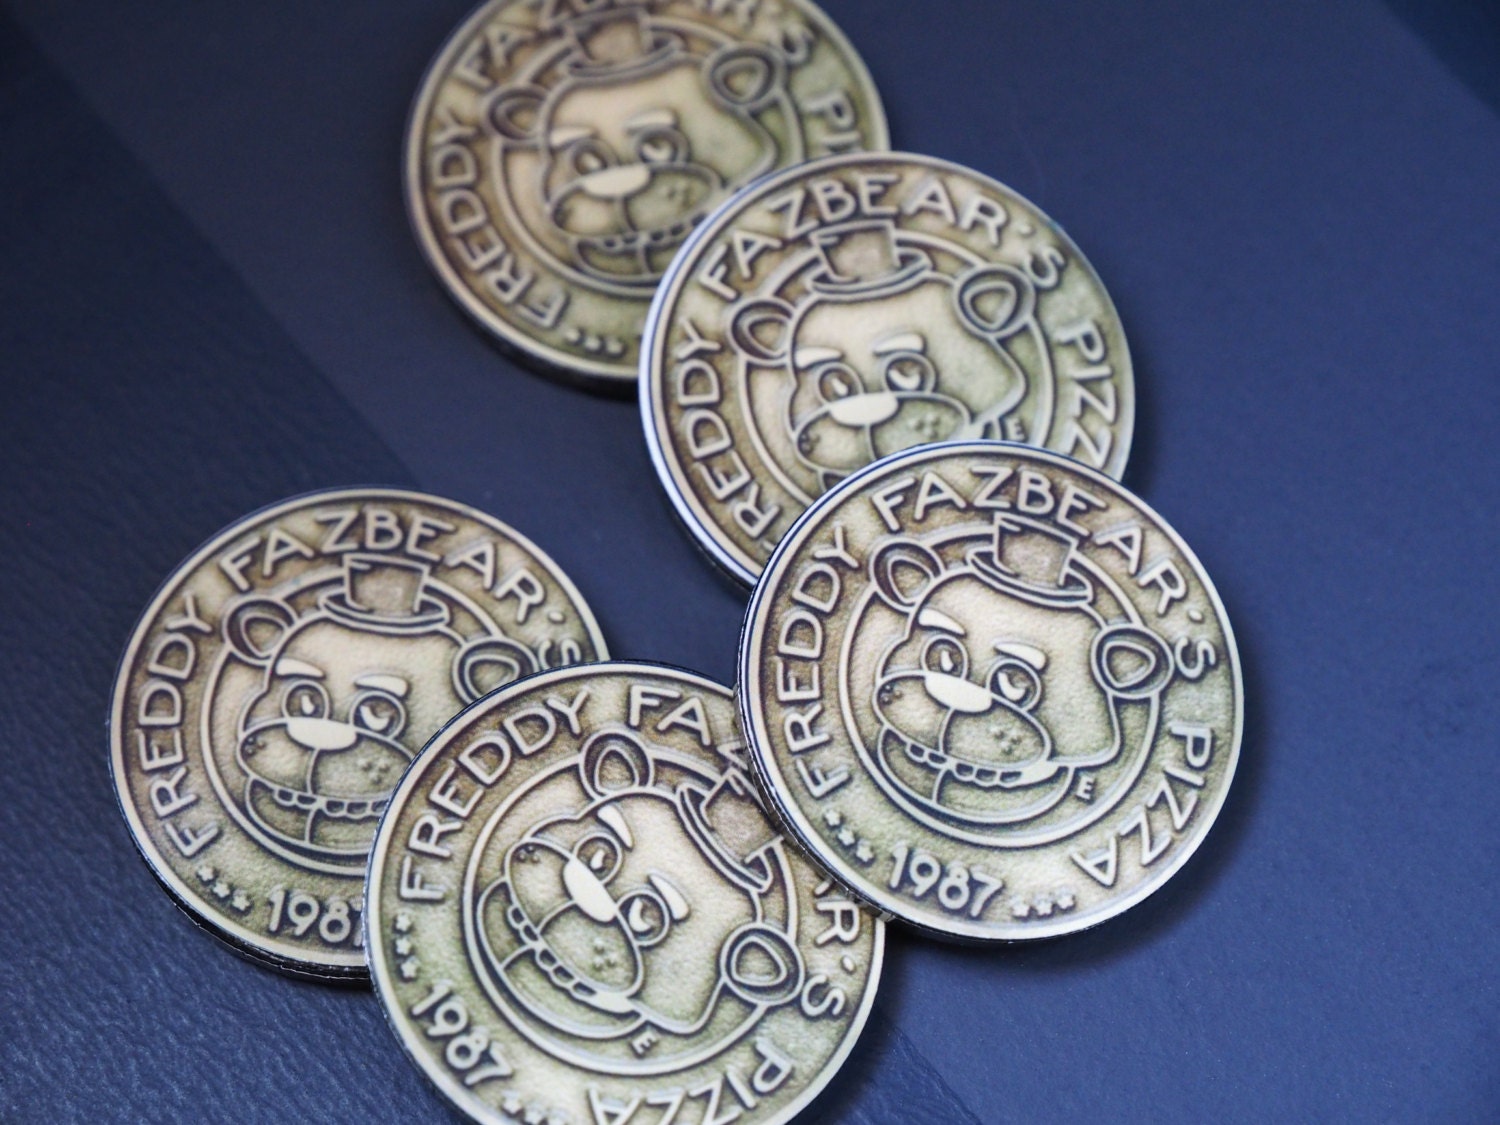 Five Nights at Freddy's - Collectible Arcade Tokens